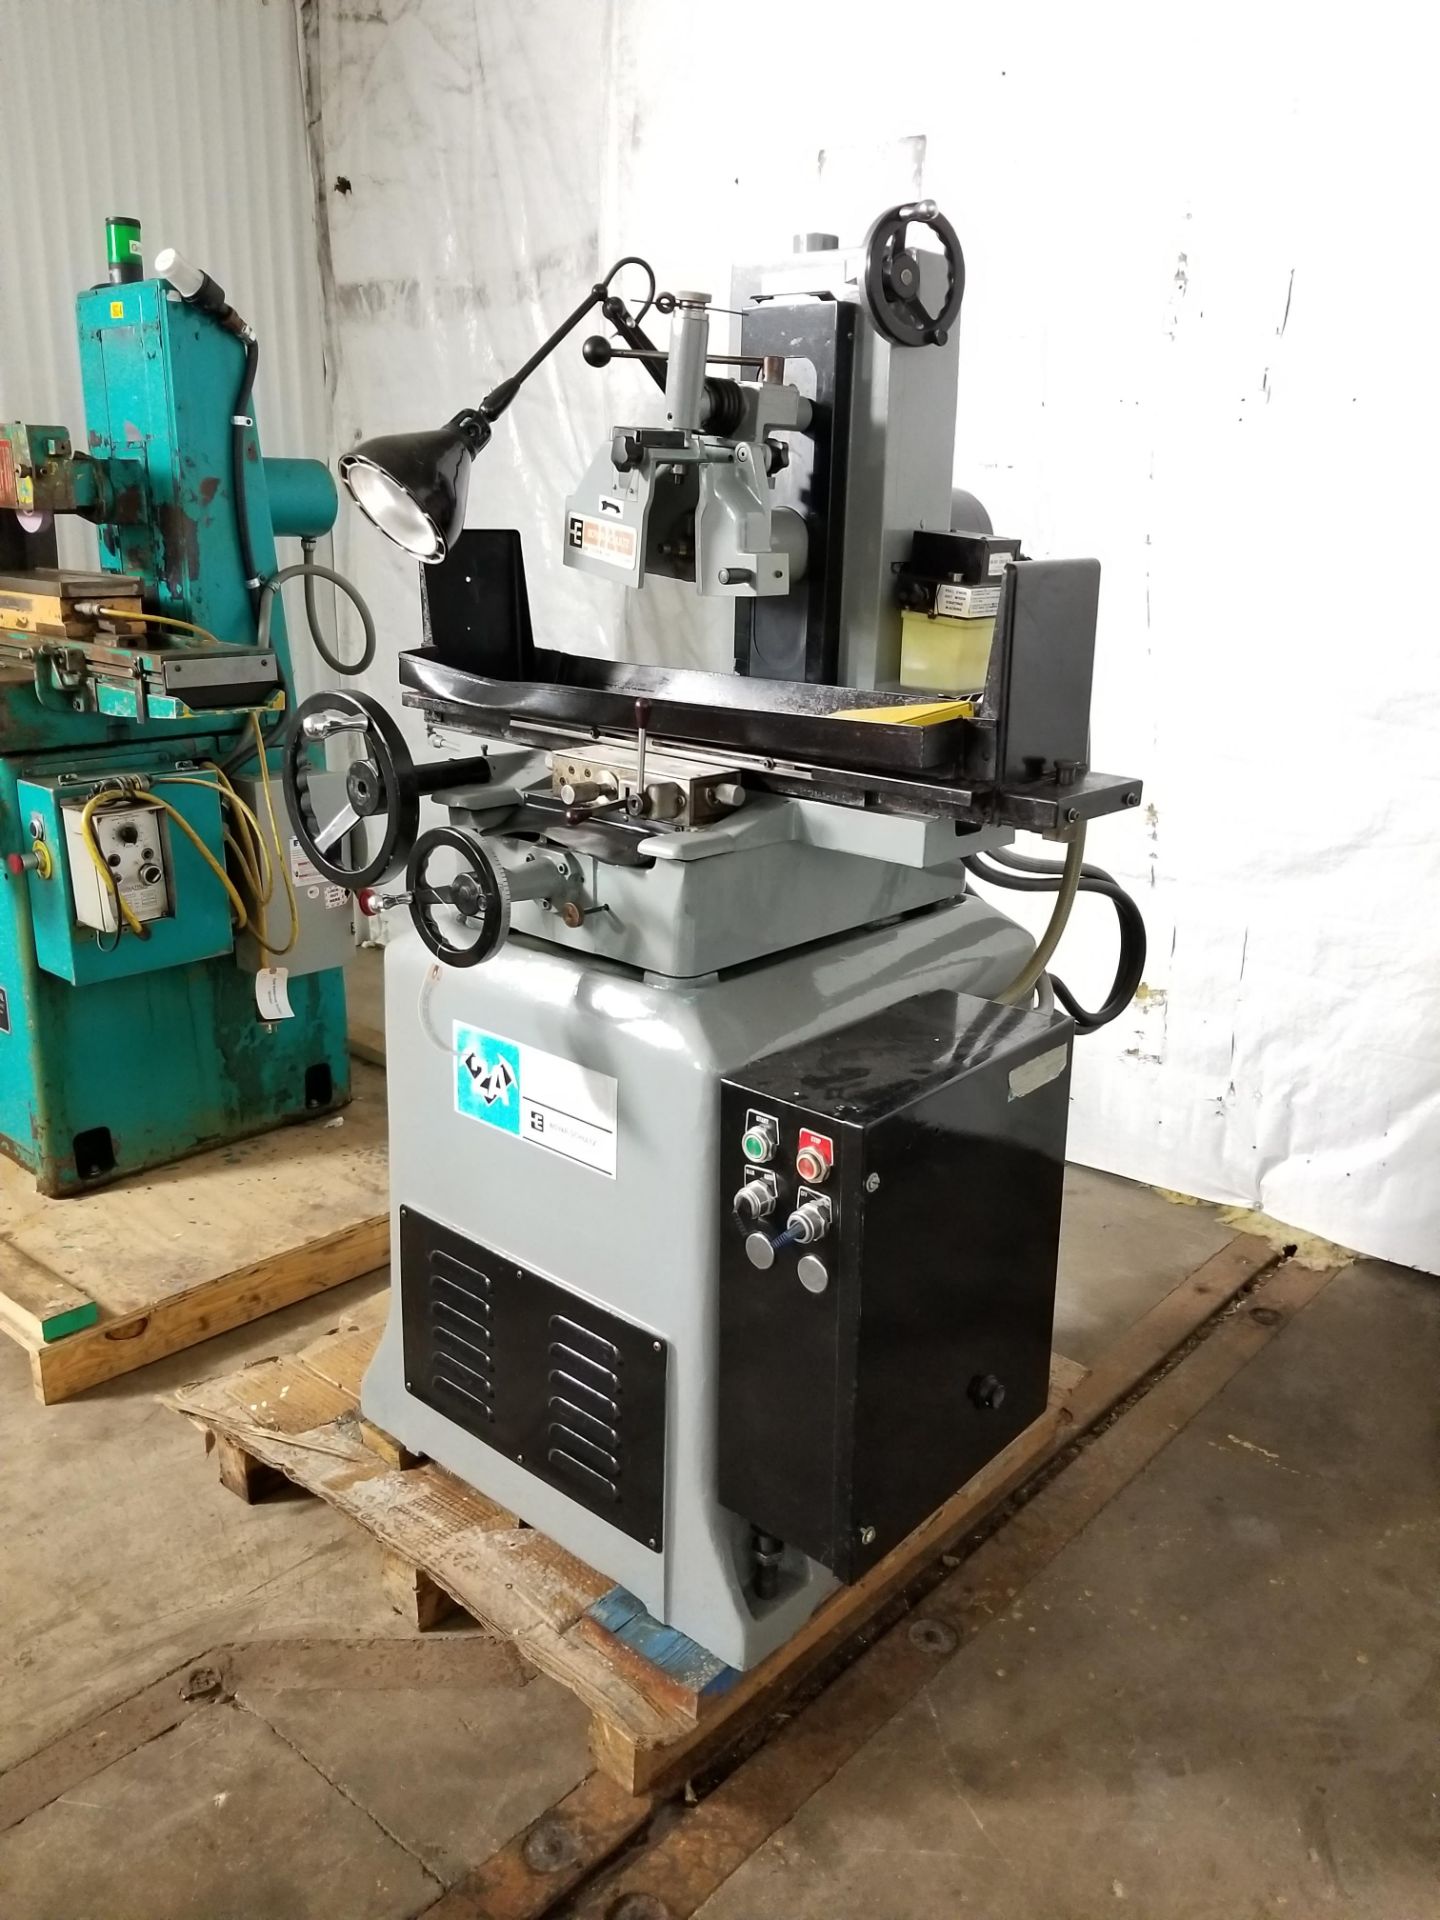 BOYER-SCHULTZ 6'' X 18'' CHALLENGER HYDRAULIC SURFACE GRINDER, MODEL 2A, SN CH-3464-2A, ADJUSTABLE - Image 2 of 5